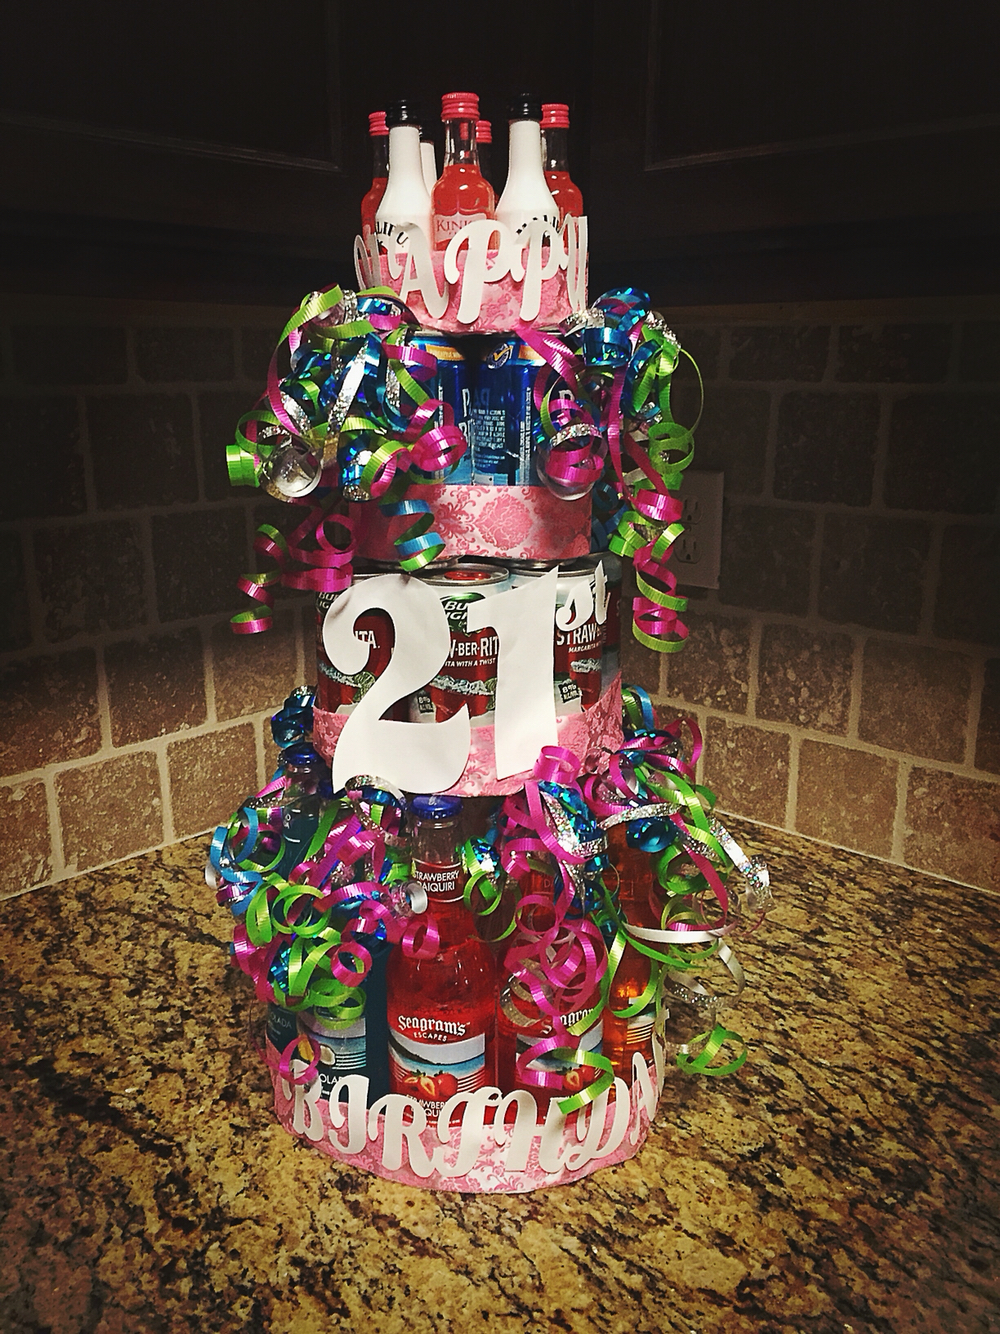 21st Birthday Cakes with Alcohol